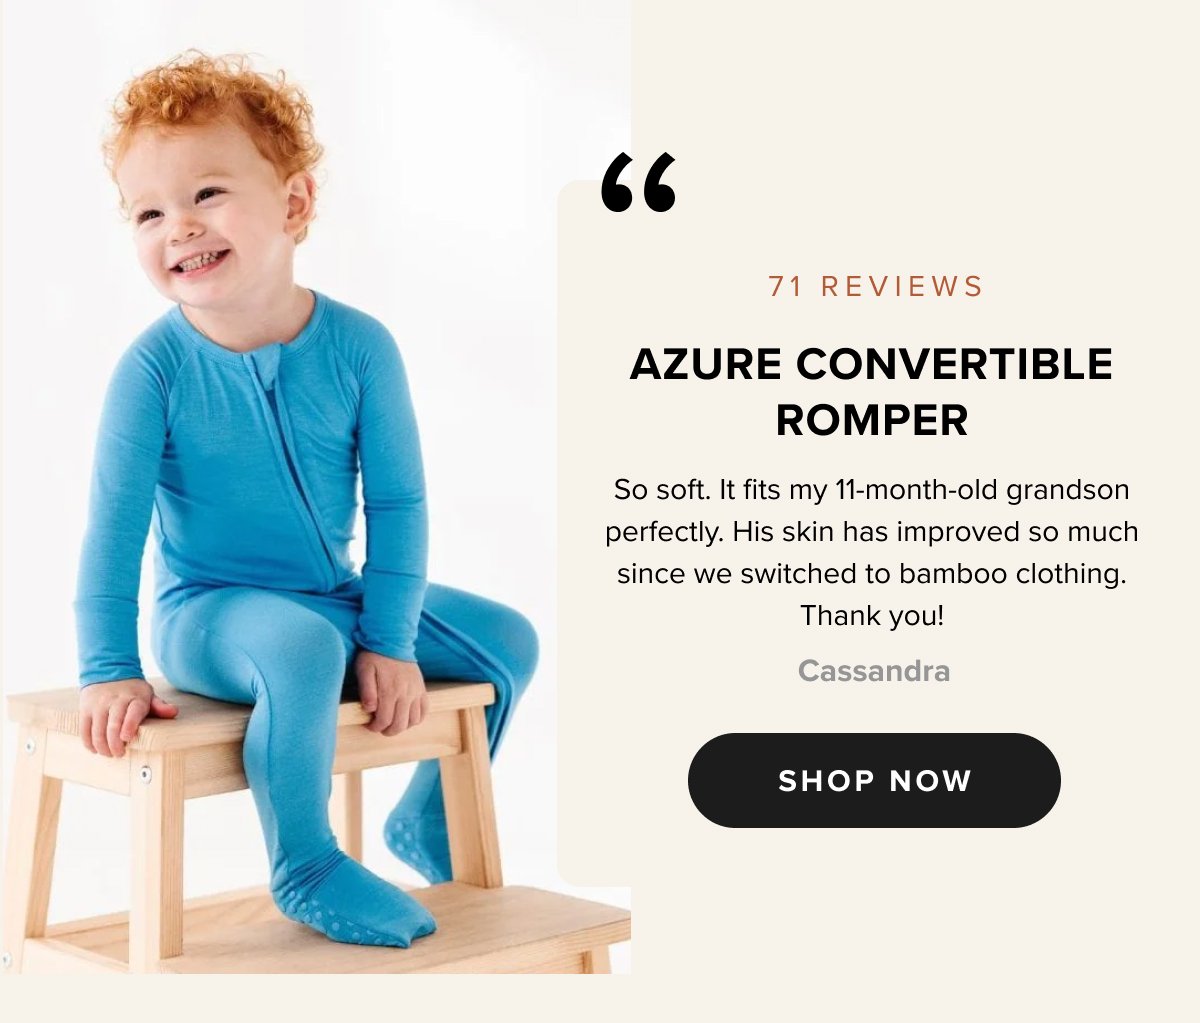 Azure Convertible Romper So soft. It fits my 11-month-old grandson perfectly. His skin has improved so much since we switched to bamboo clothing. Thank you ! Cassandra